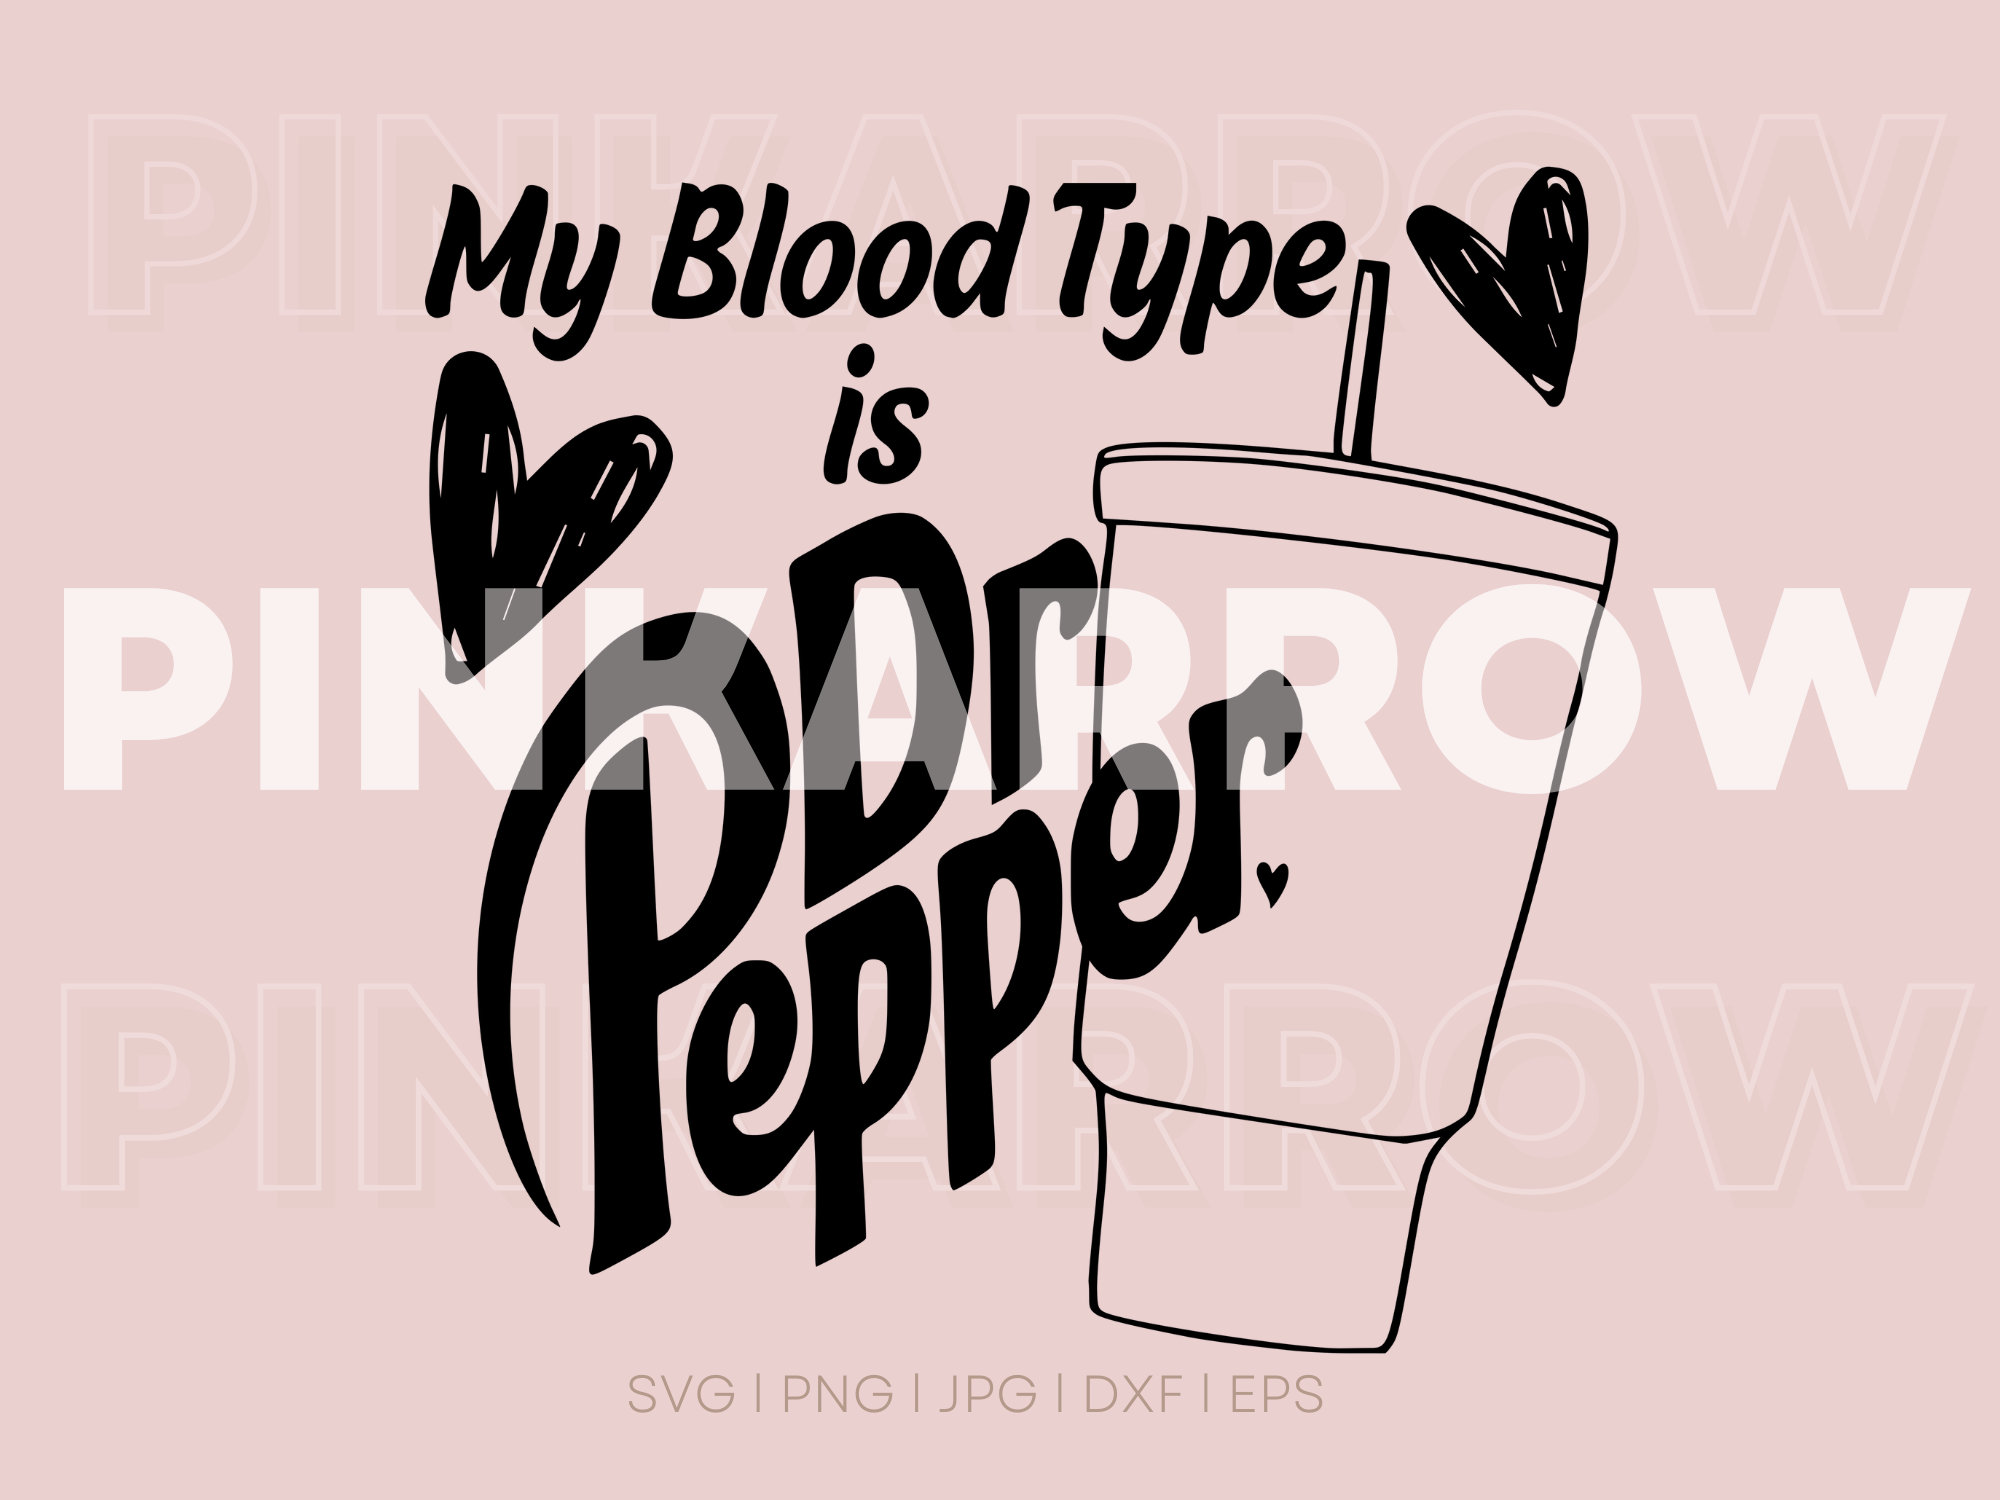 Personalized In Case Of Accident My Blood Type Is Dr Pepper